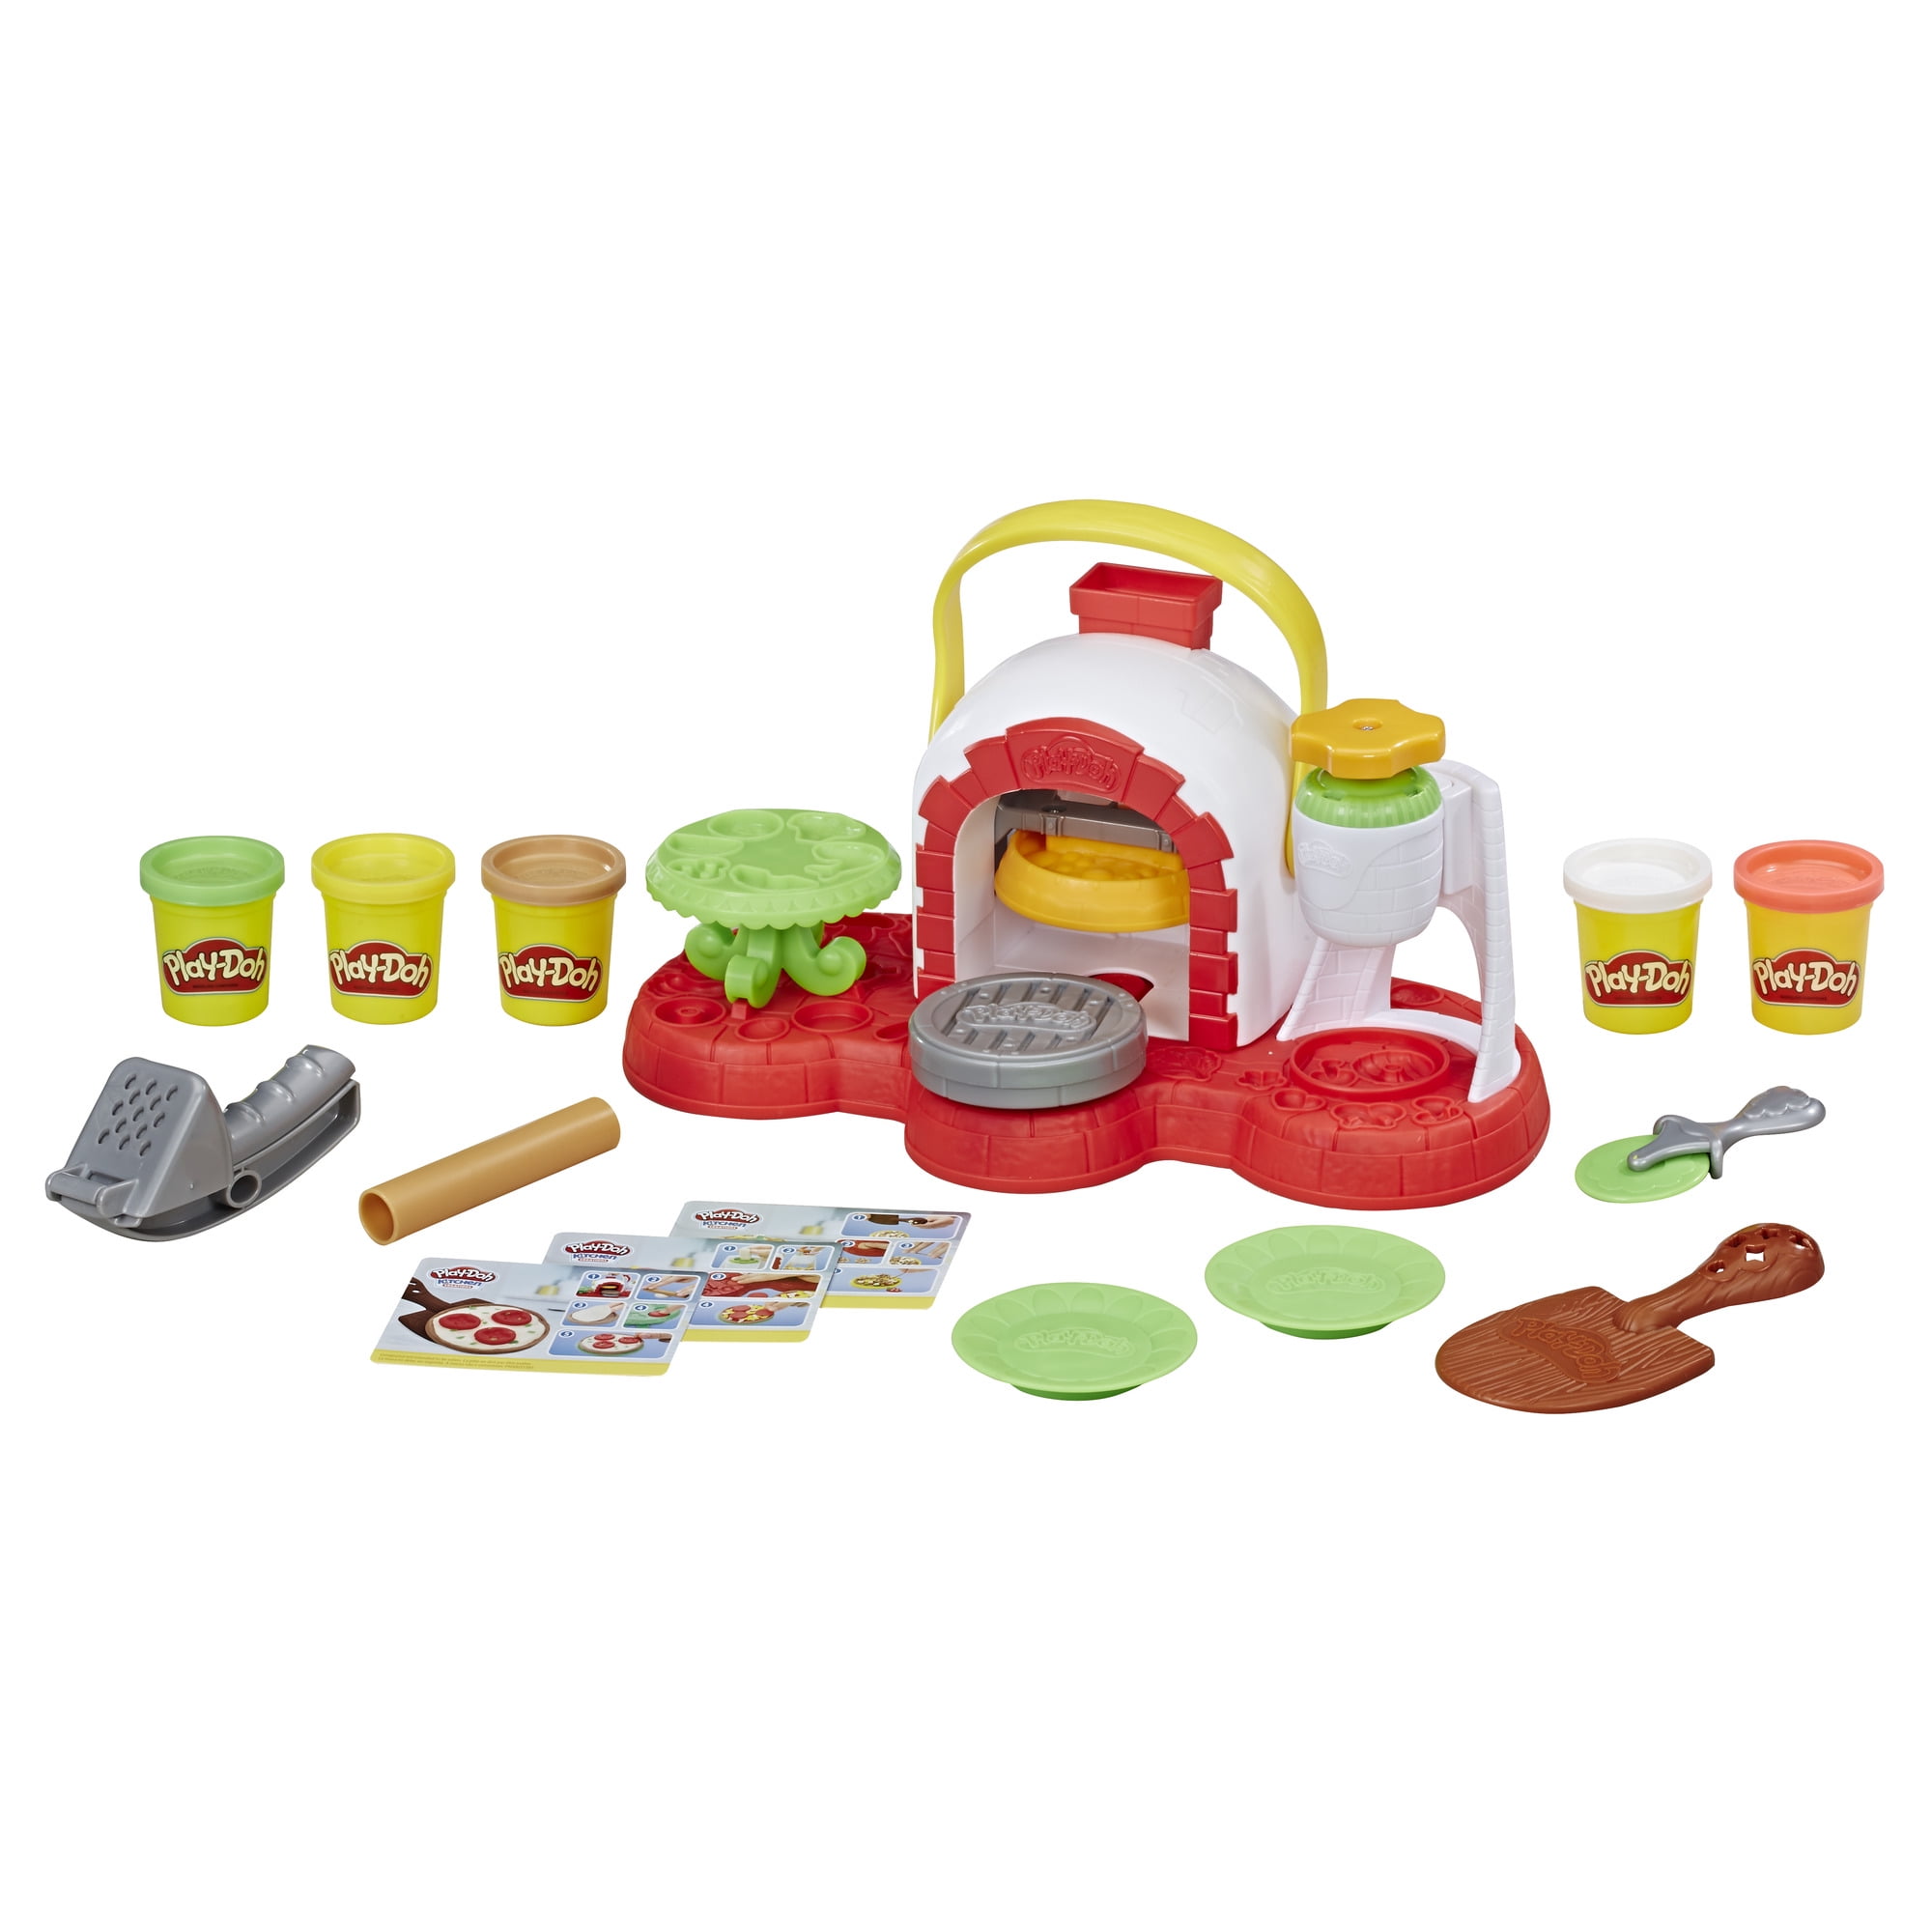 Play-Doh Kitchen Creations Pizza Party  *NEW* 